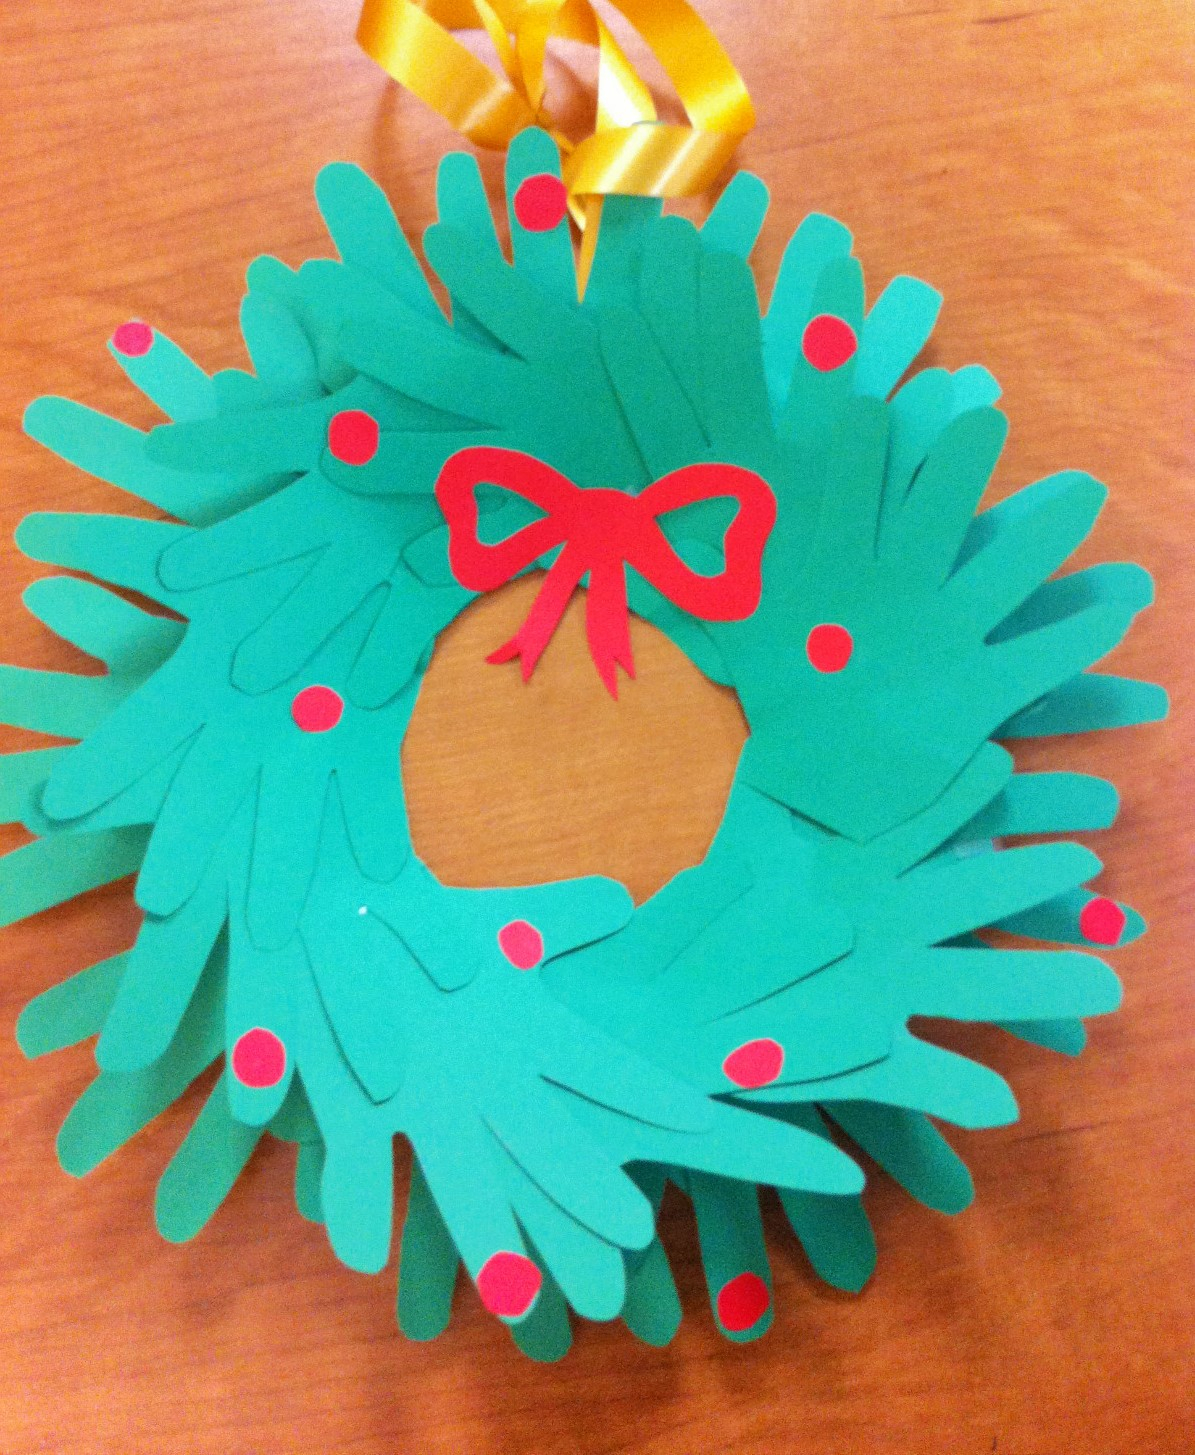 10 Stunning Arts And Crafts Ideas With Construction Paper easy construction paper crafts for christmas find craft ideas 1 2024